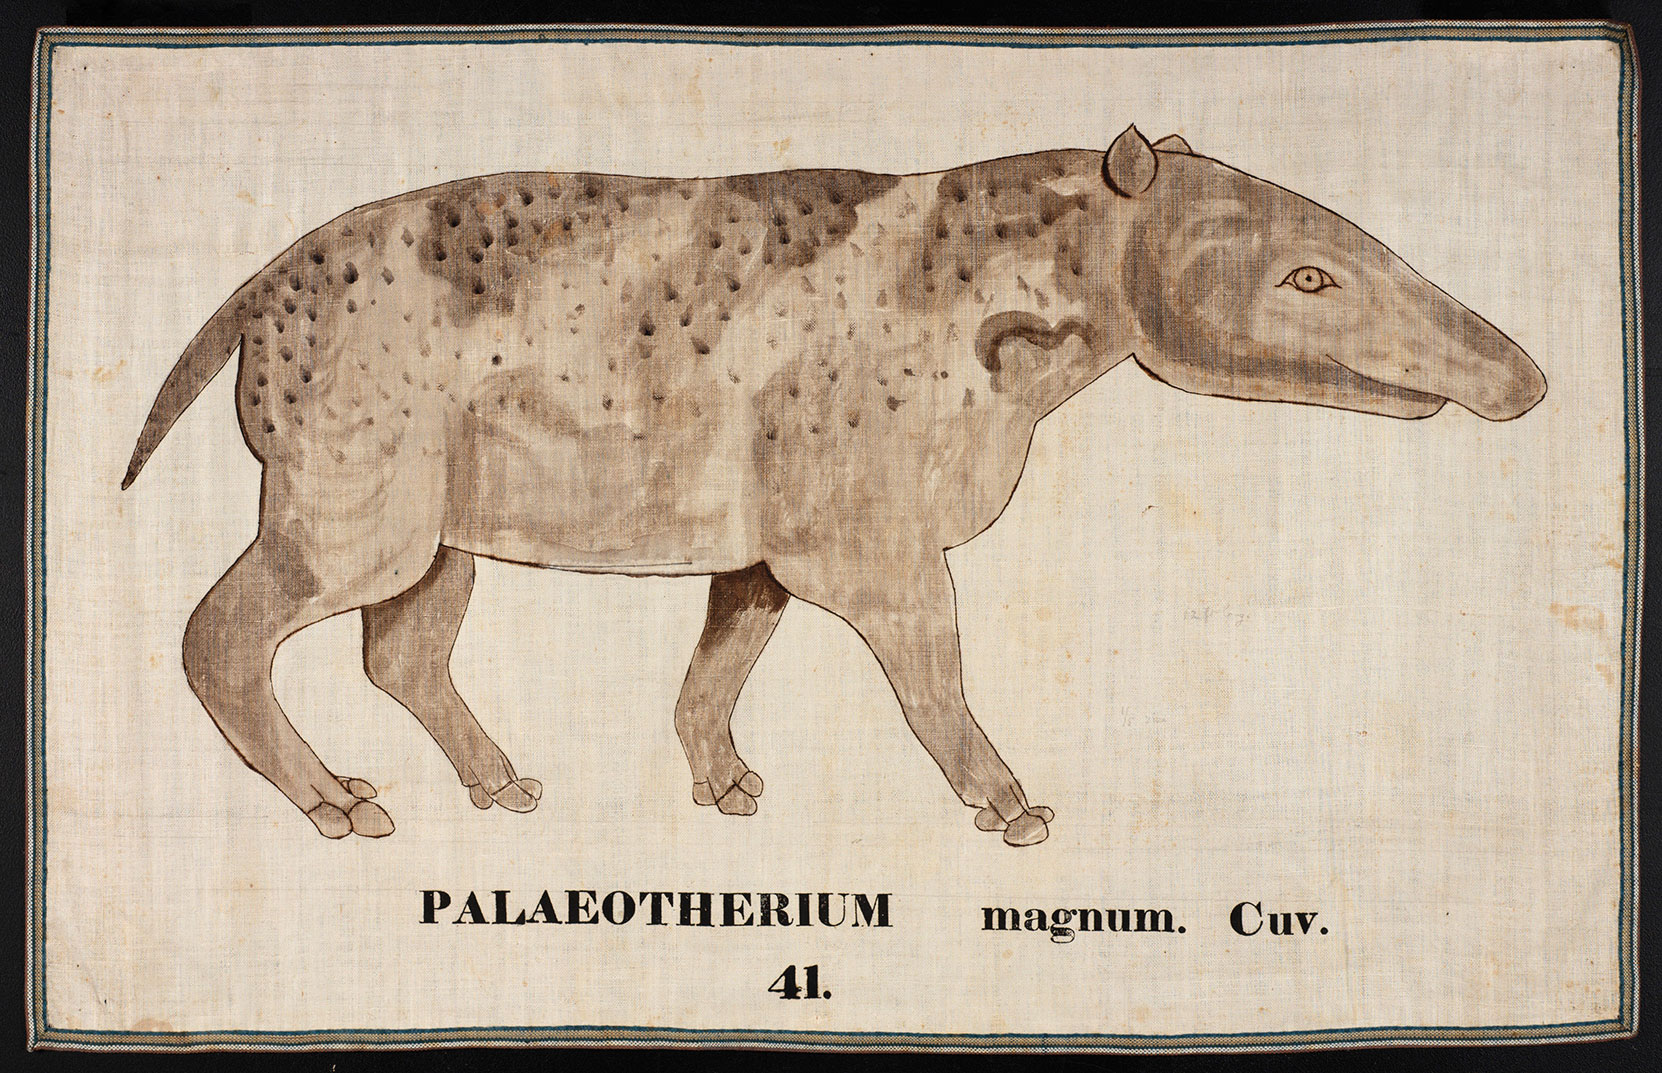 Palaeotherium by Ora White Hitchcock